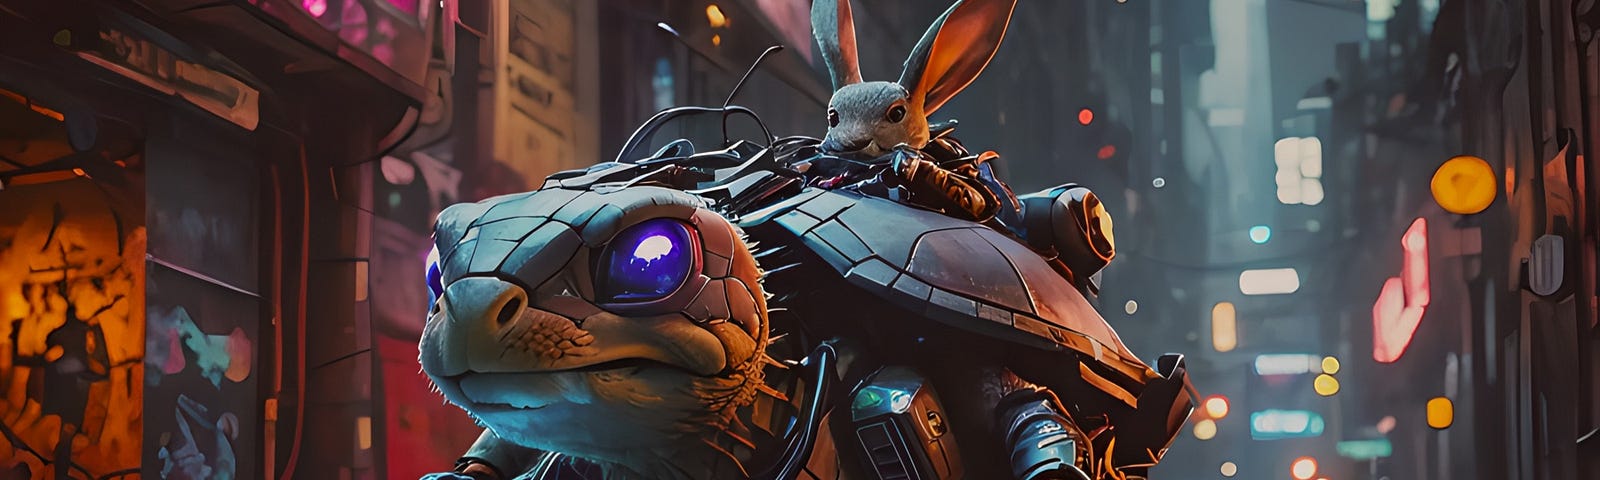 Picture of a rabbit riding a robot turtle as if in a race.